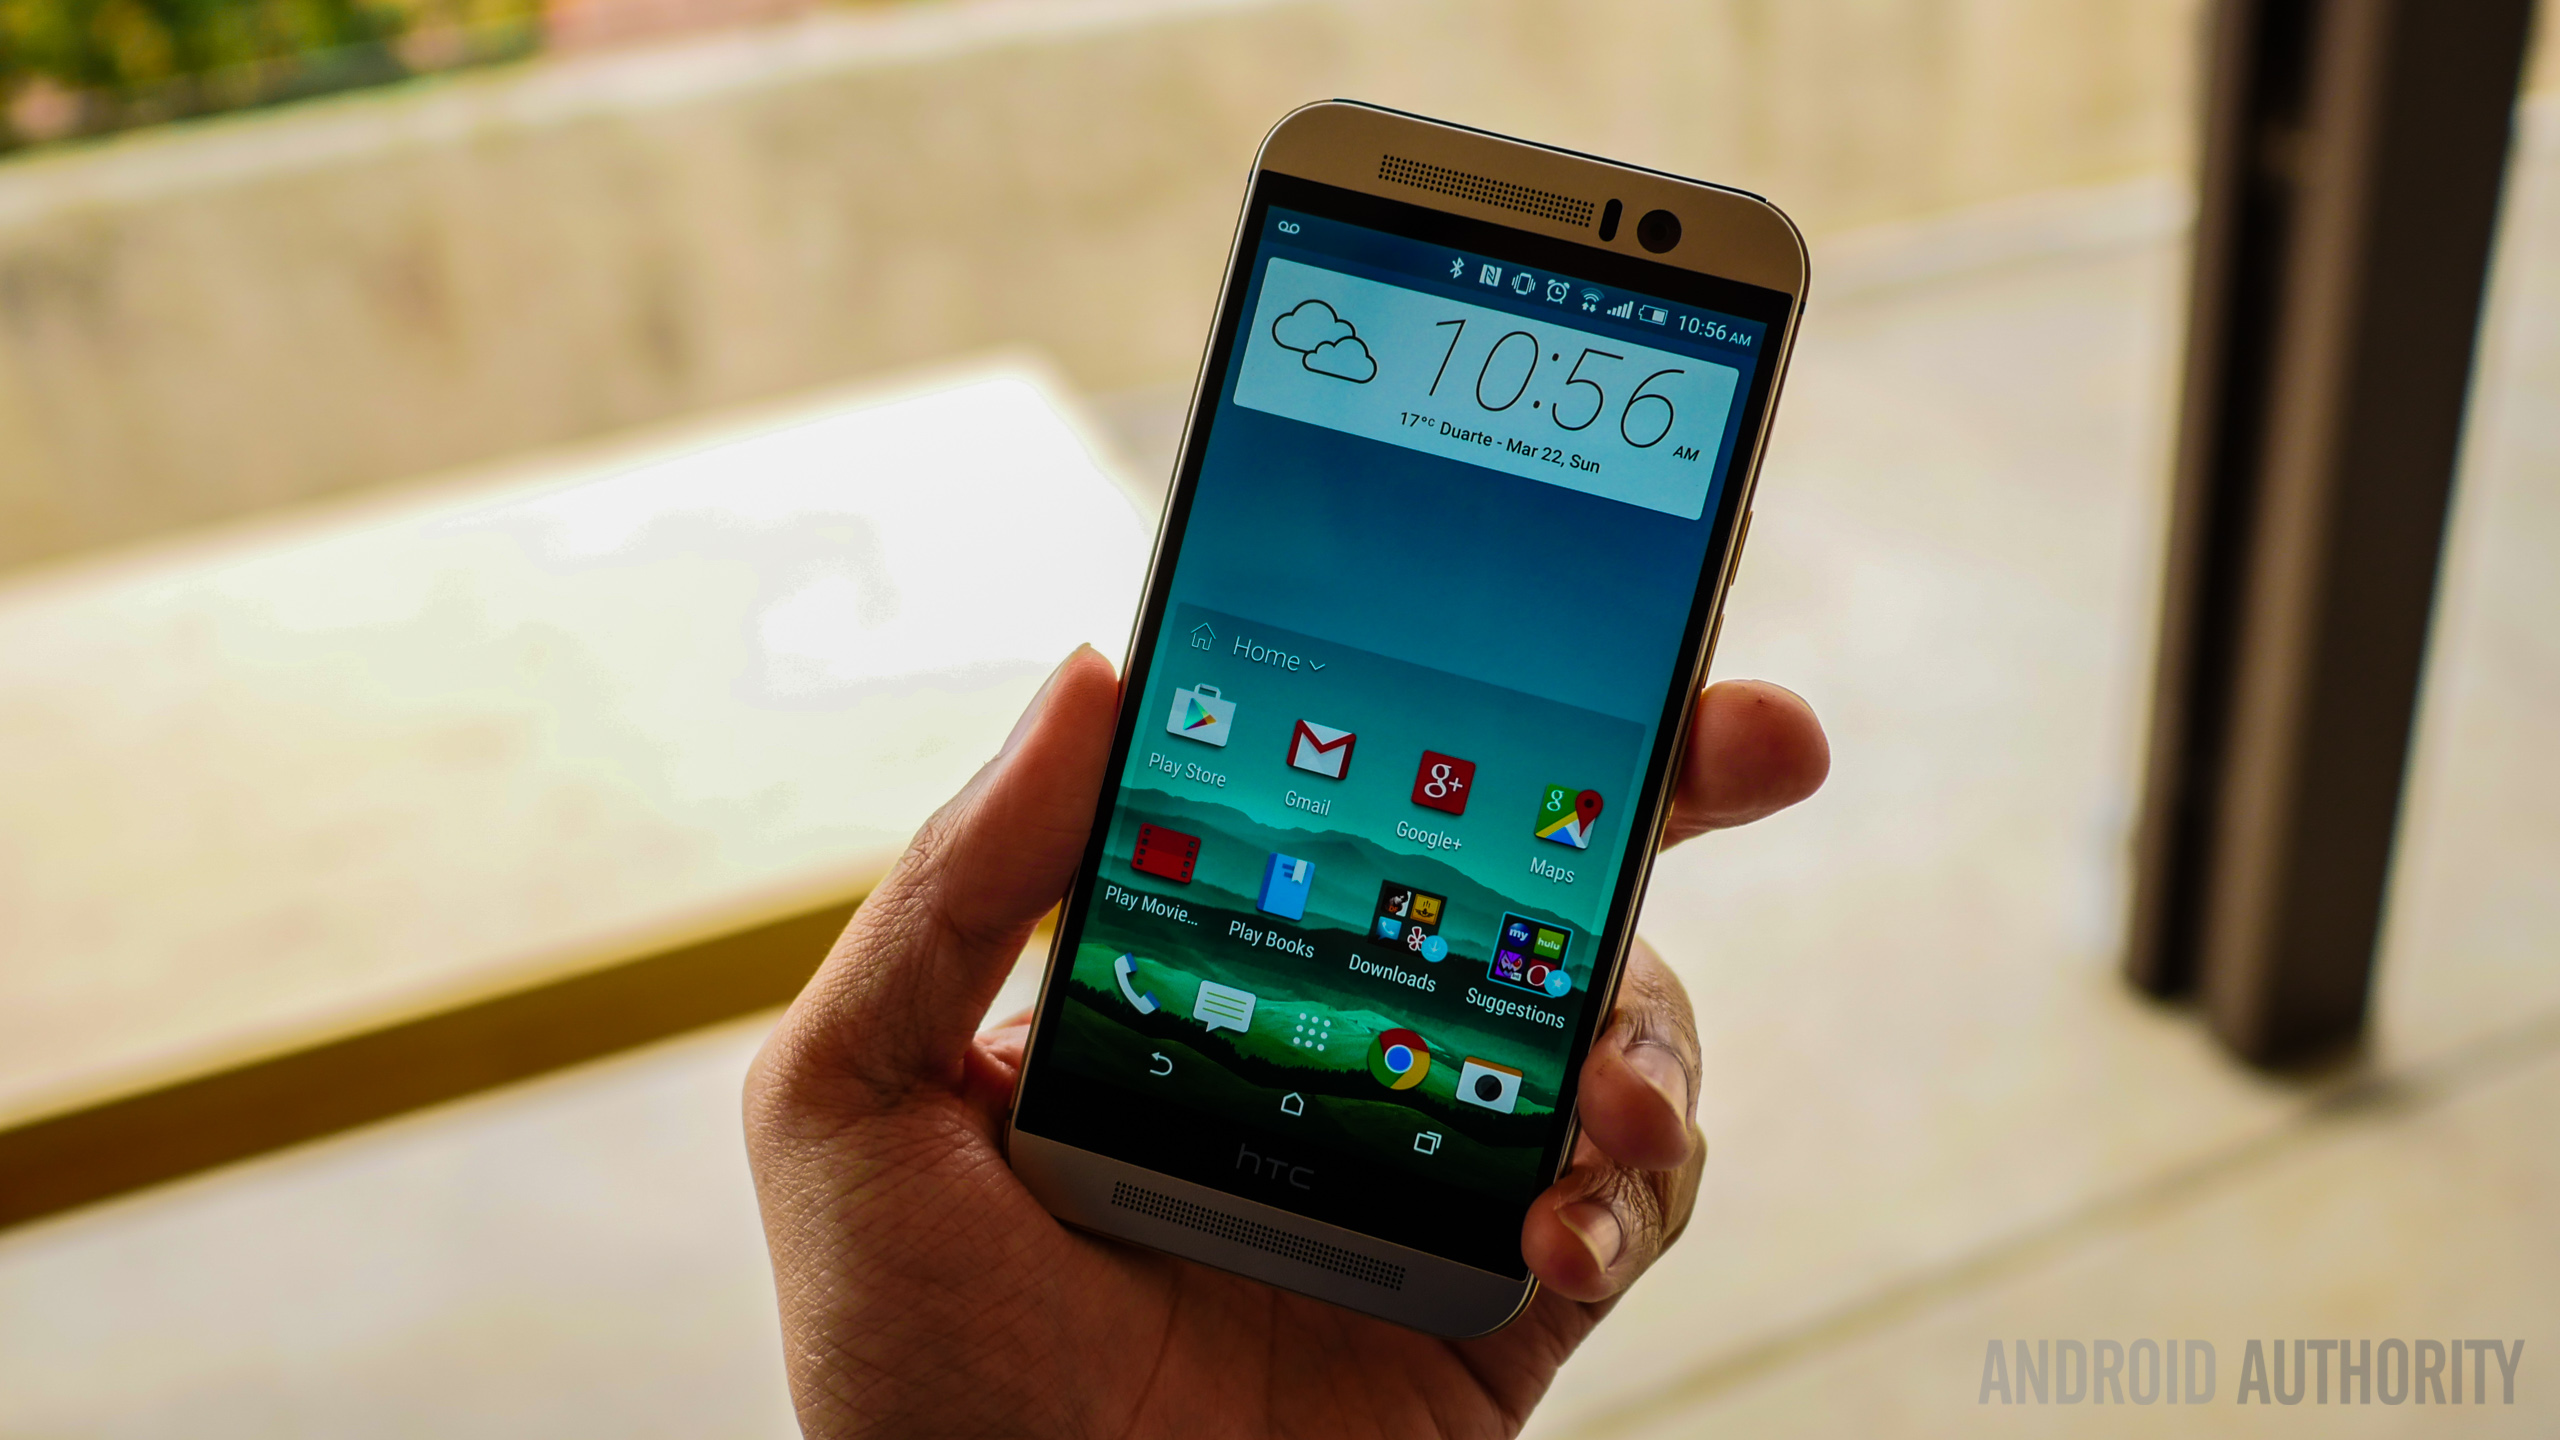 expand campus approach 8 Problems with the HTC One M9 and how to fix them